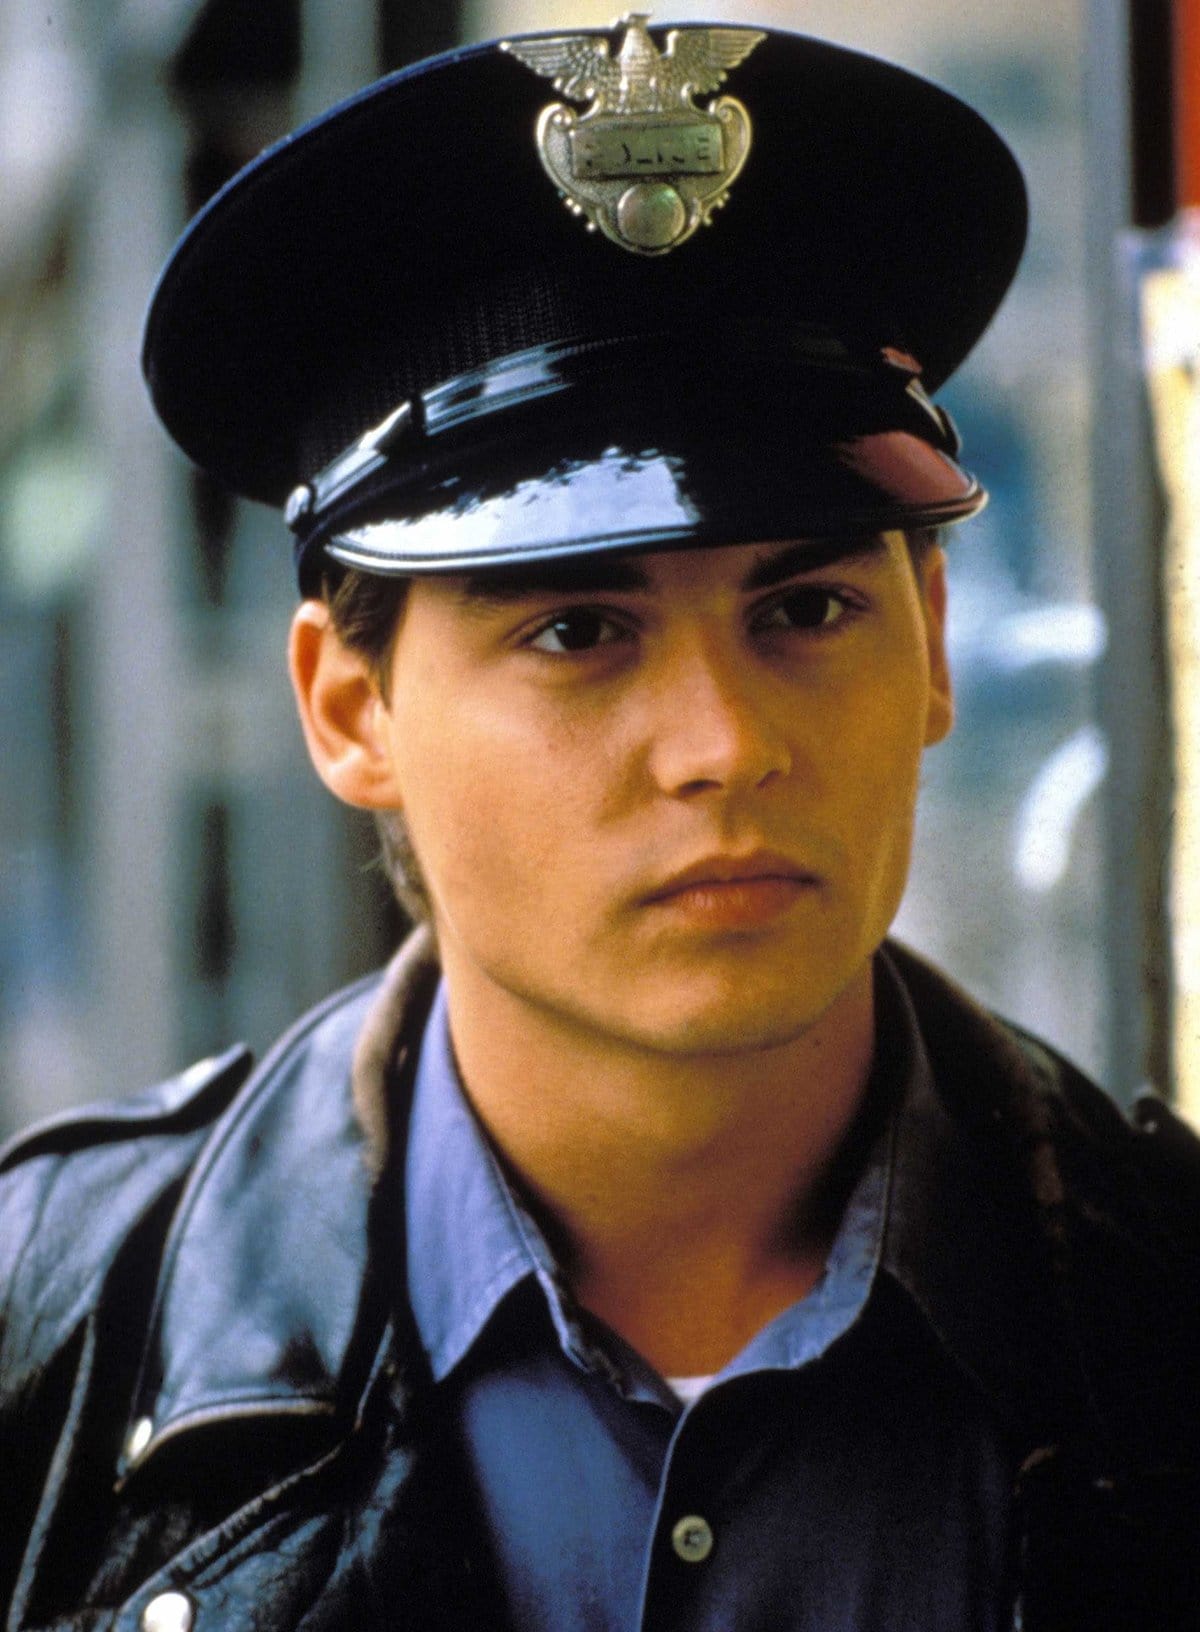 Johnny Depp was 23 years old when the first episode of 21 Jump Street aired on April 12, 1987